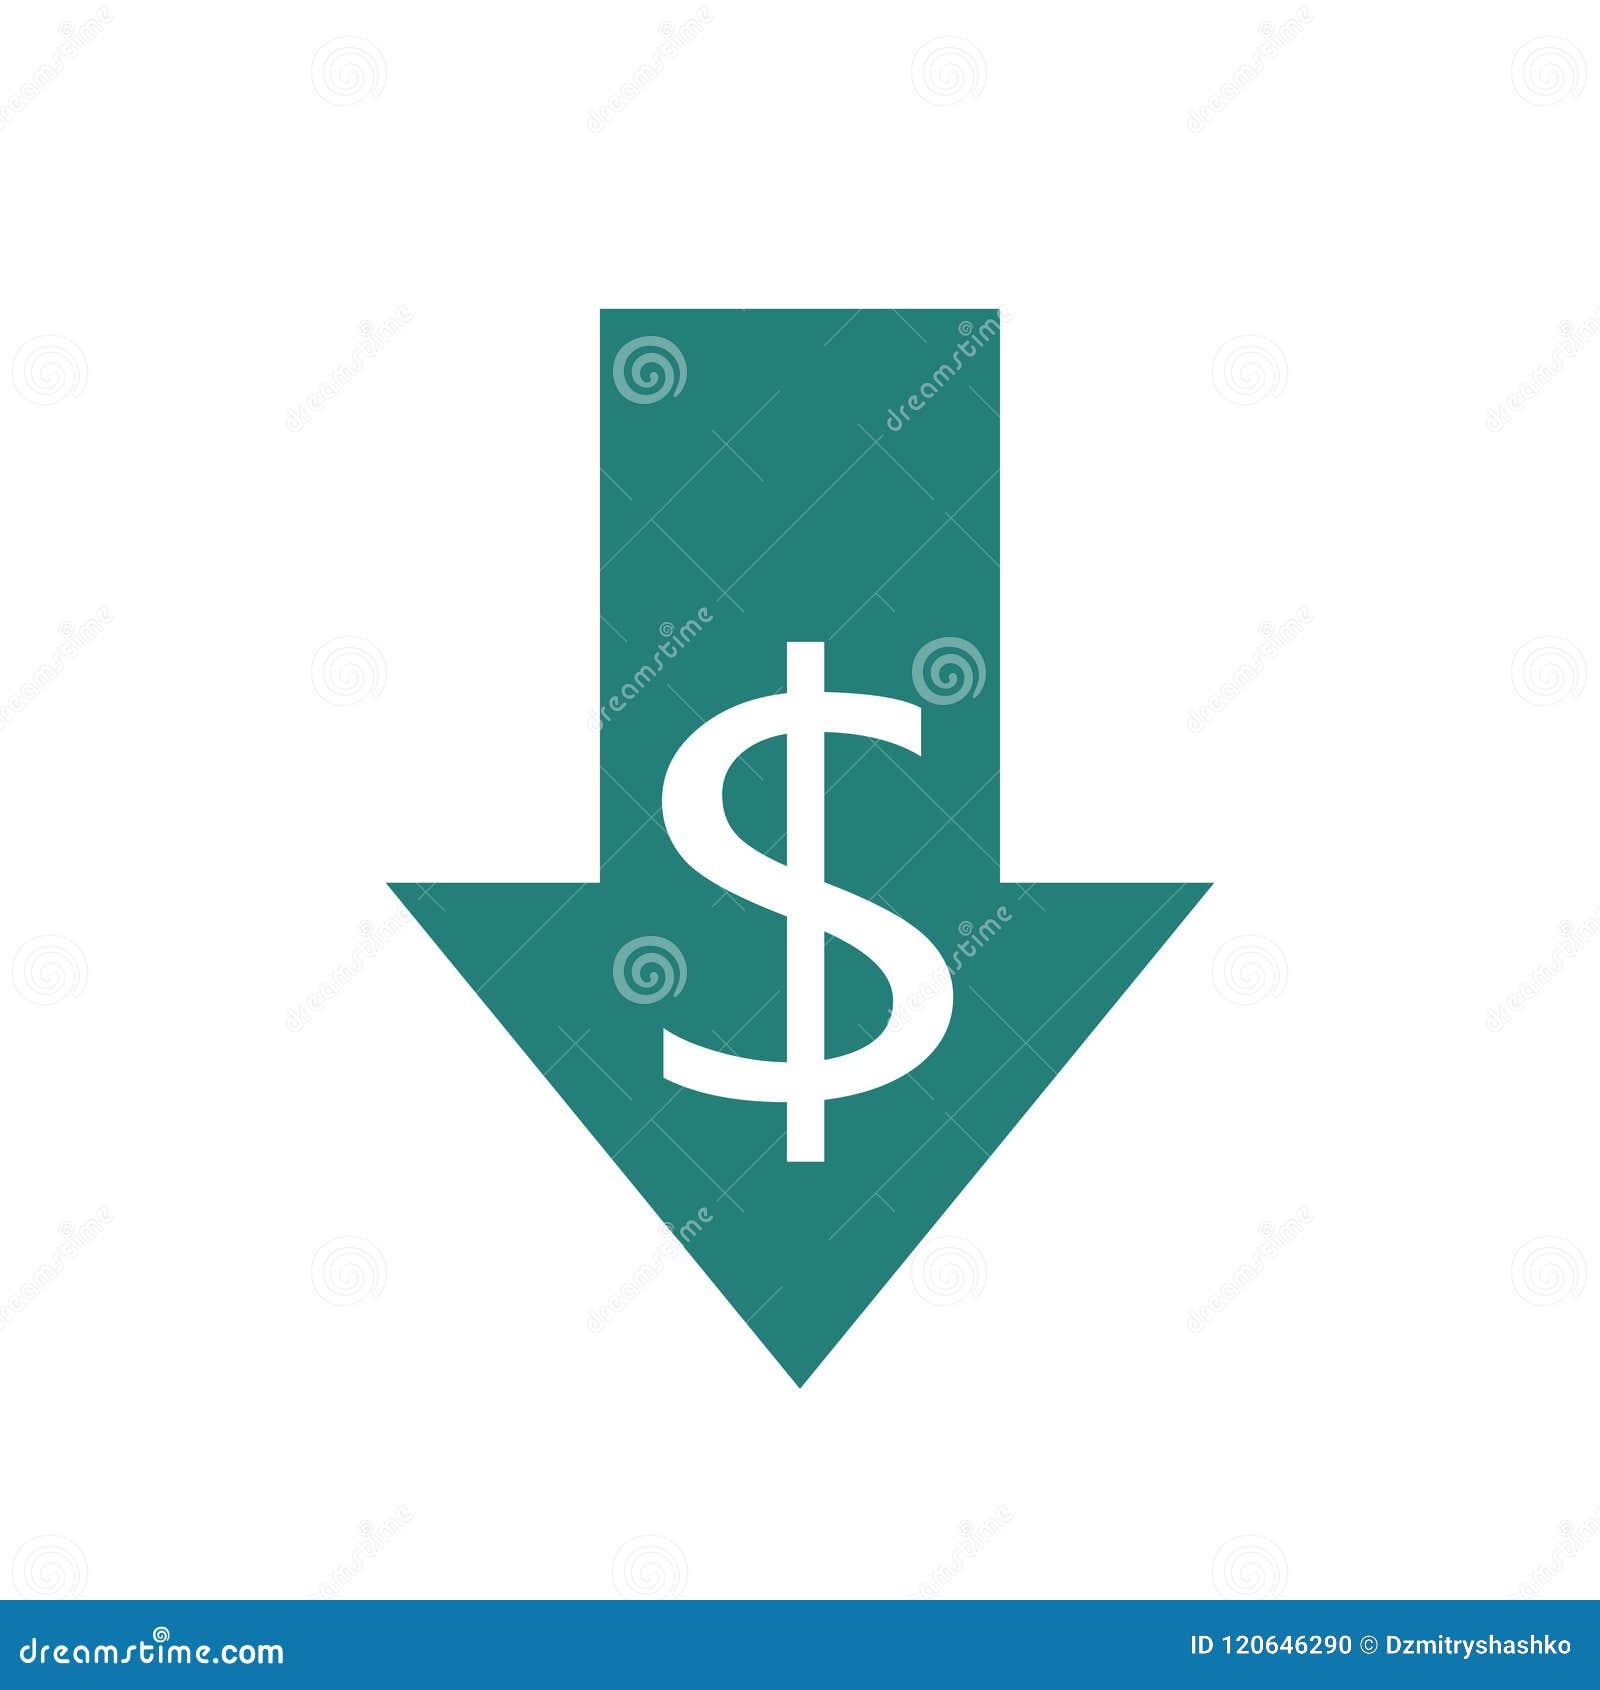 Reduce costs icon stock vector. Illustration of icon - 120646290